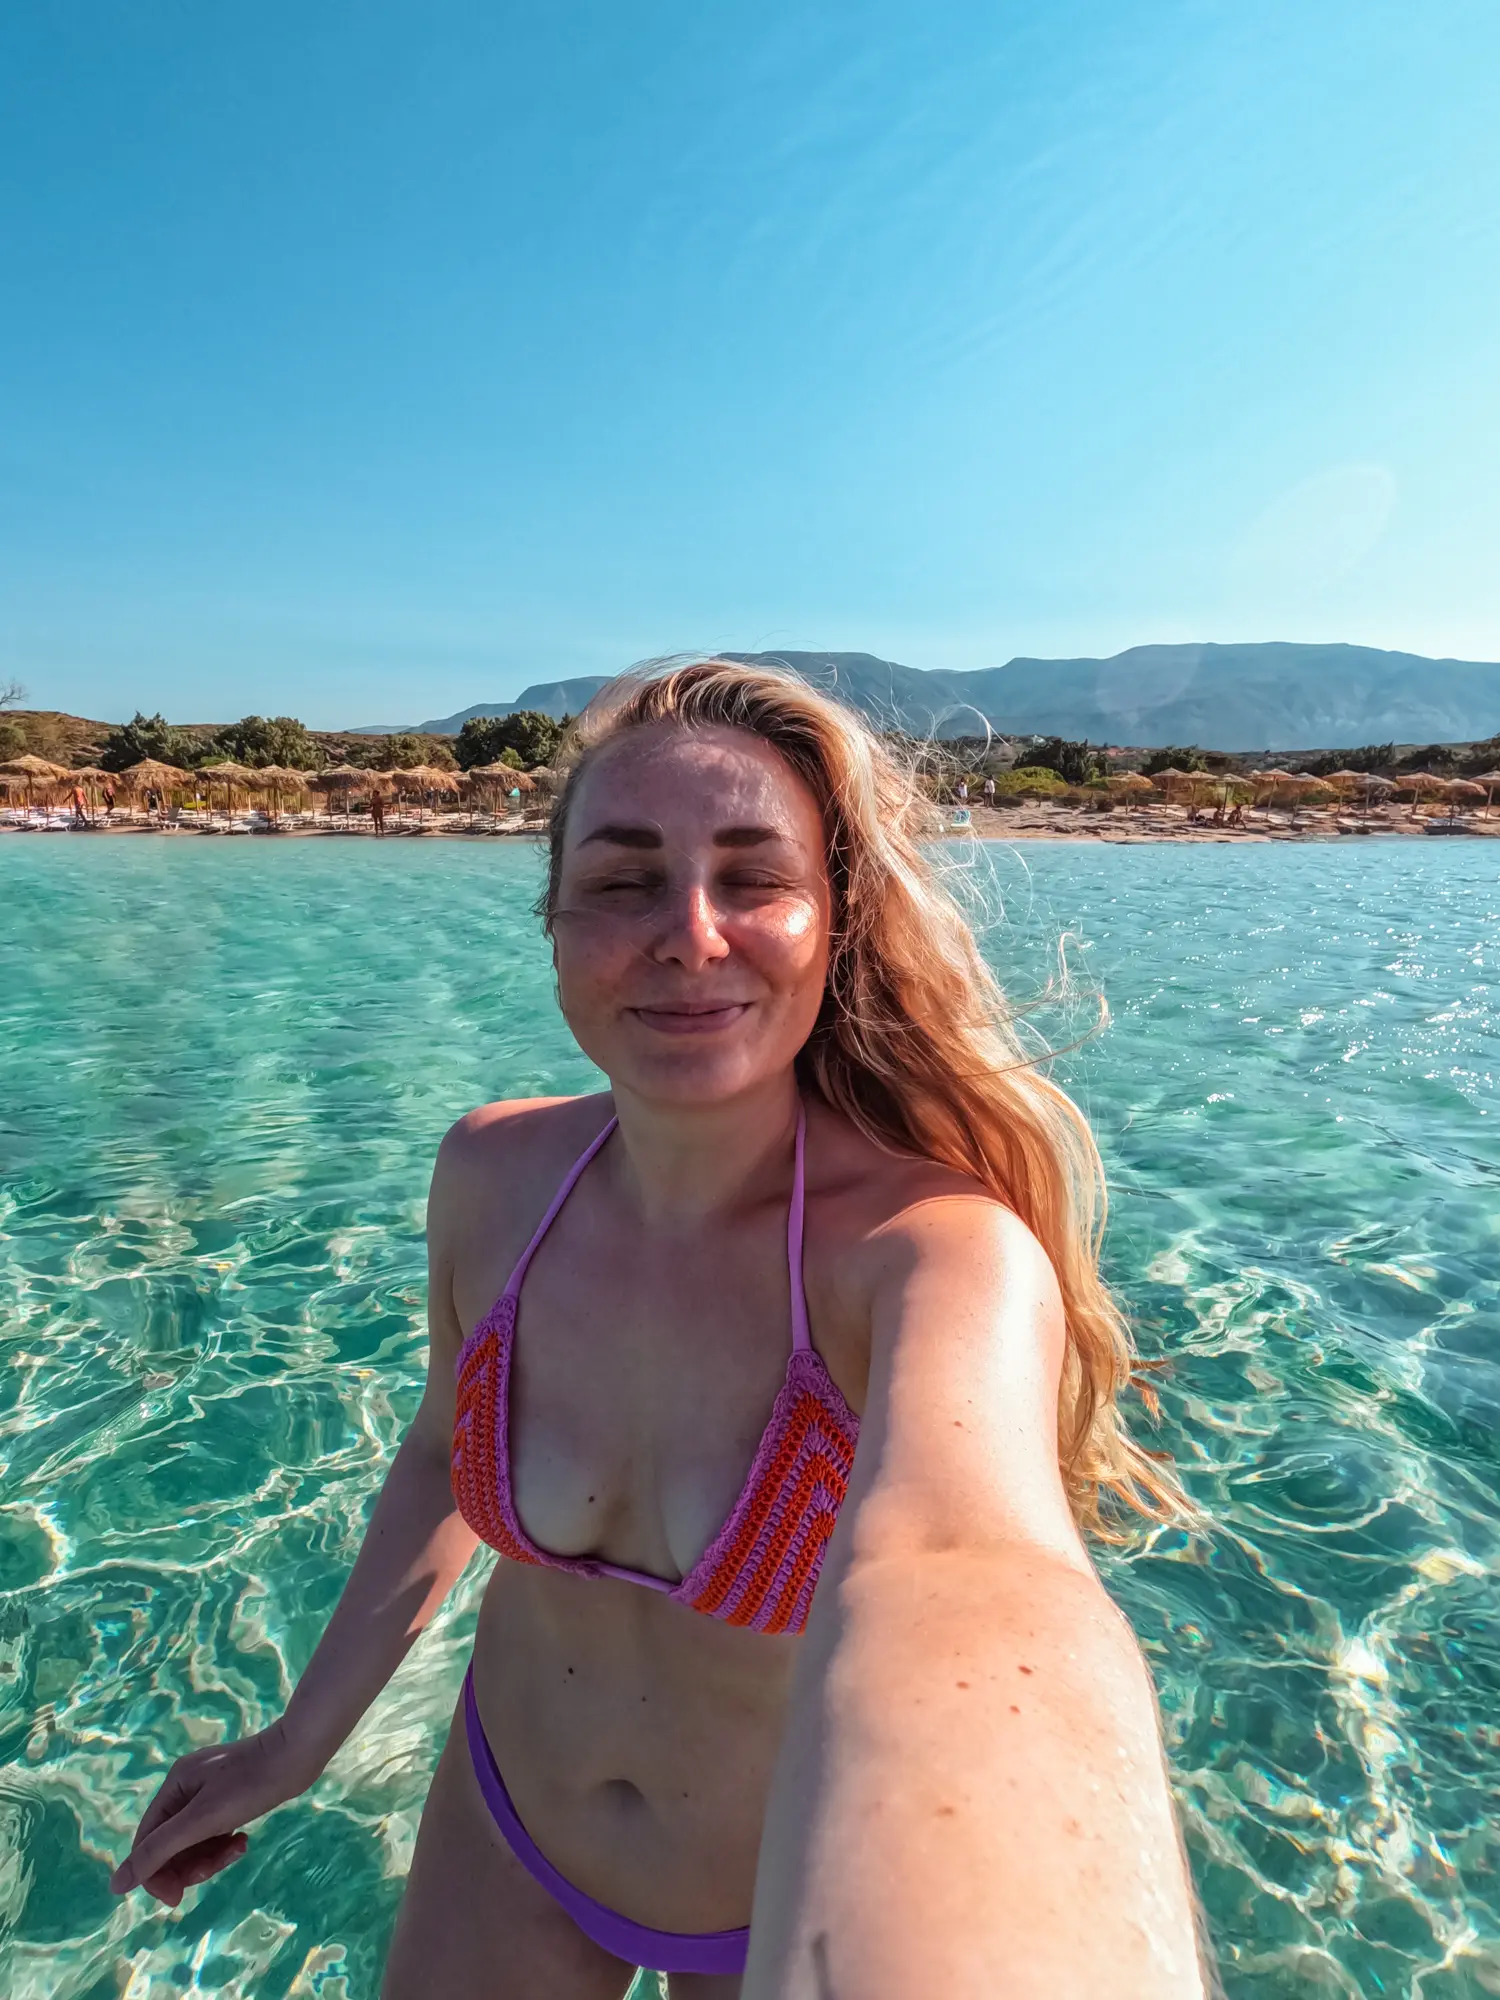 Girl with long hair in a purple and orange bikini taking a selfie with eyes closed in the turquoise waters of Elafonisi Beach from Chania.